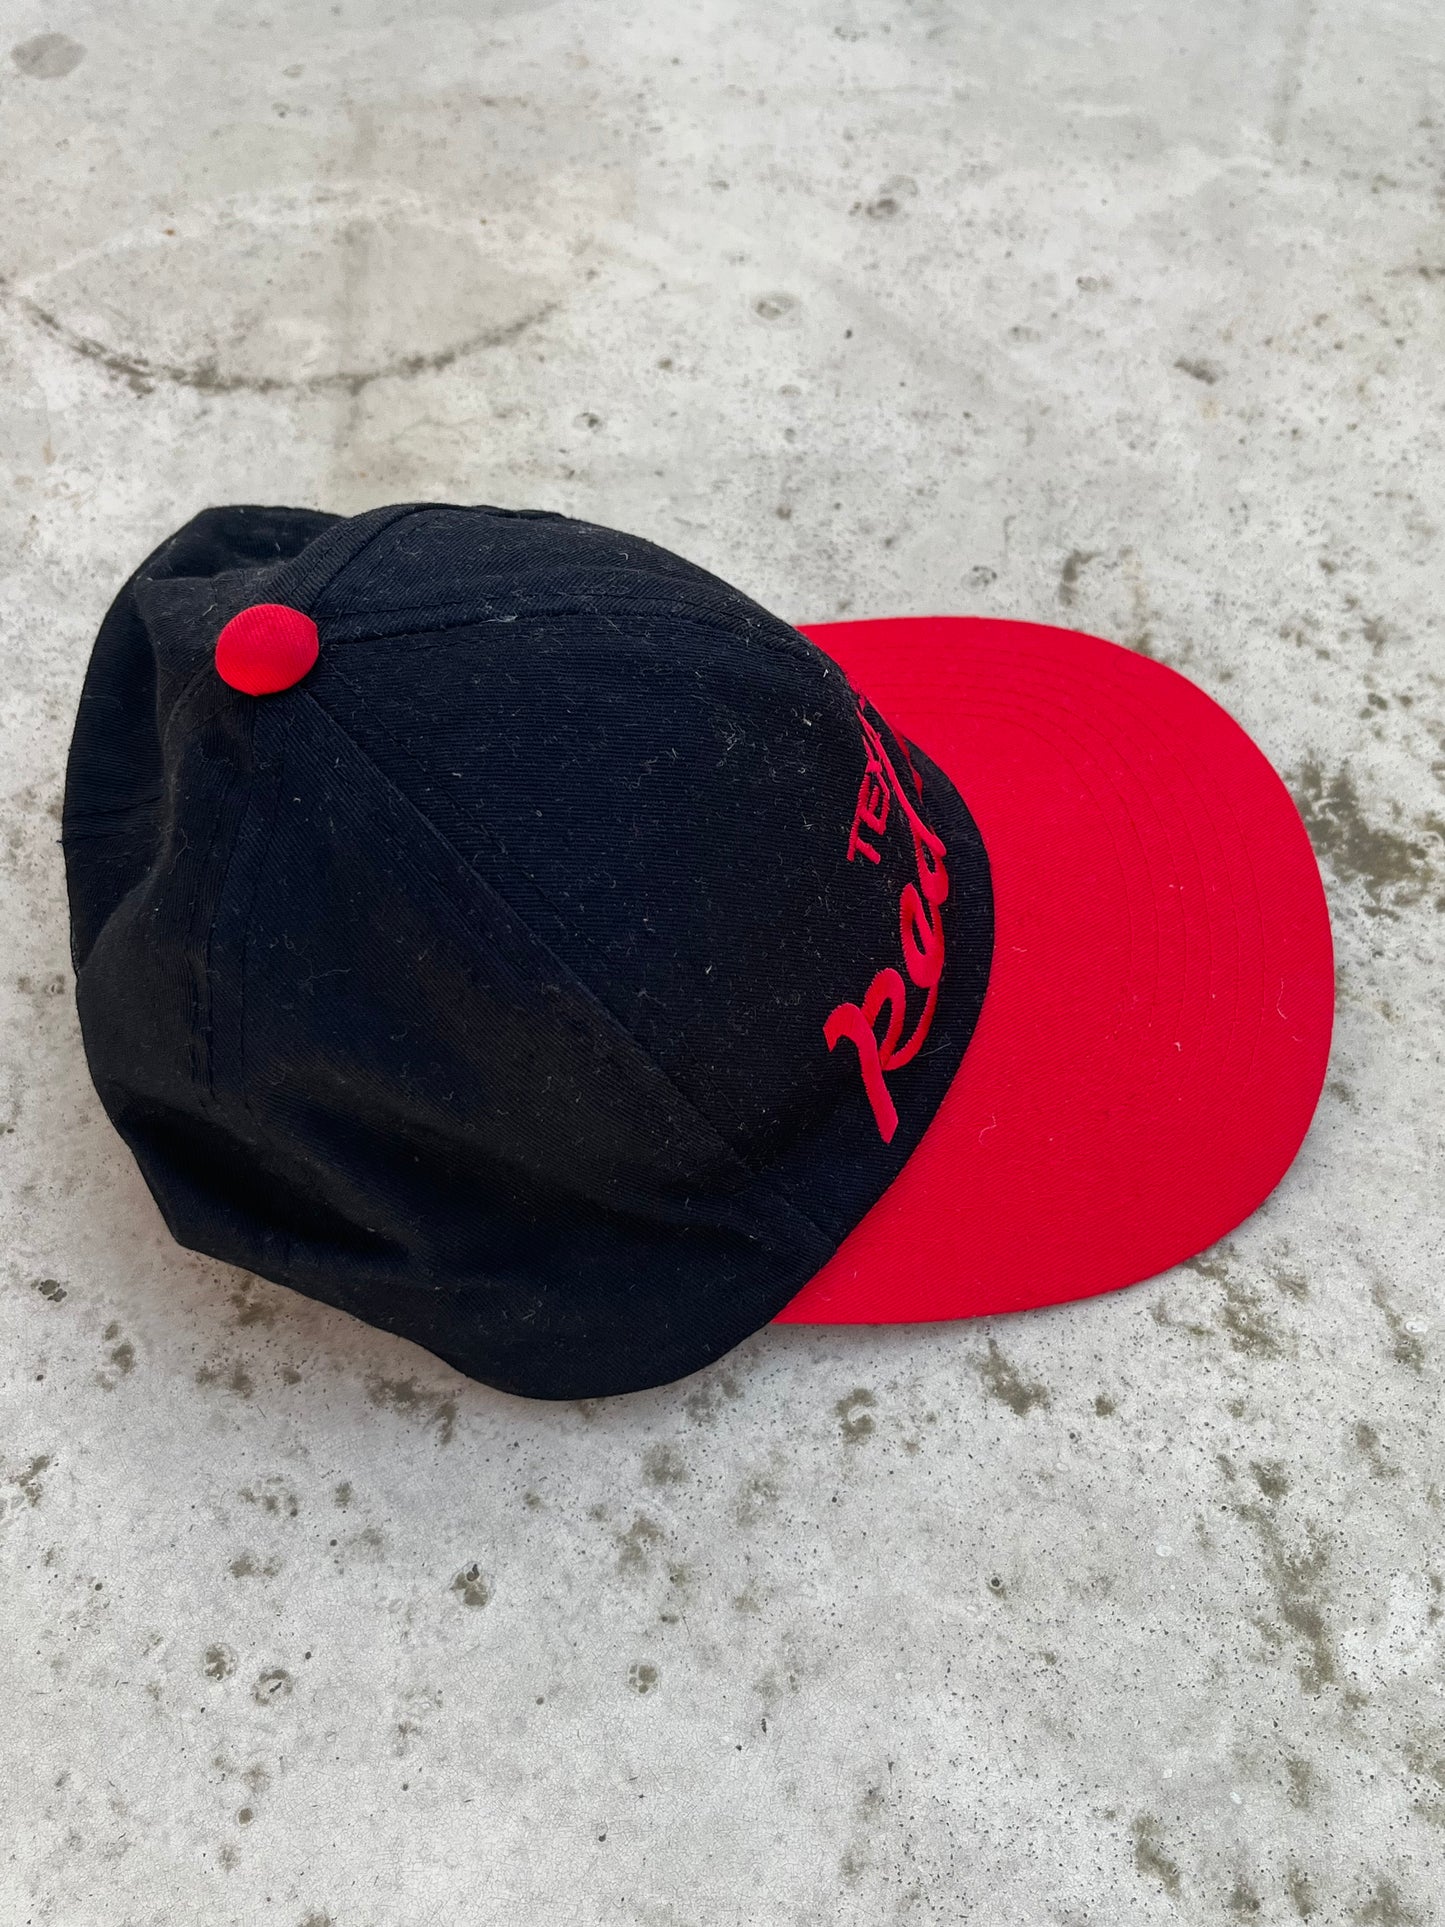 Vintage Texas Red Sox hat